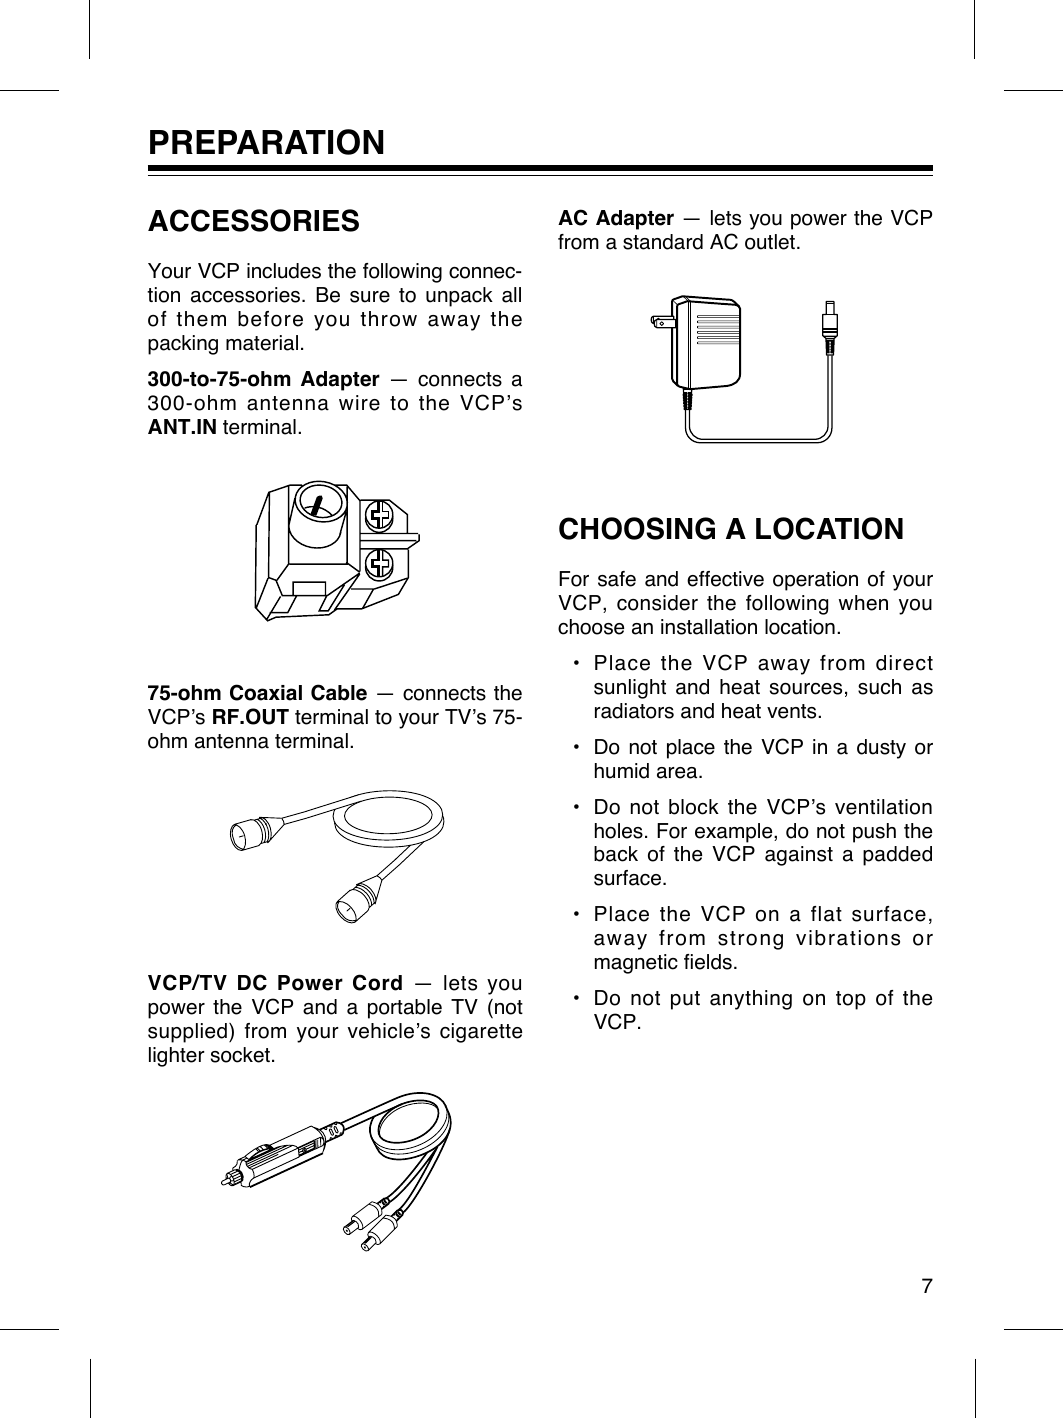 PREPARATIONACCESSORIESYour VCP includes the following connec-tion accessories. Be sure to unpack allof them before you throw away thepacking material.300-to-75-ohm Adapter Ñ connects a300-ohm antenna wire to the VCPÕsANT.IN terminal.75-ohm Coaxial Cable Ñ connects theVCPÕs RF.OUT terminal to your TVÕs 75-ohm antenna terminal.VCP/TV DC Power Cord Ñ lets youpower the VCP and a portable TV (notsupplied) from your vehicleÕs cigarettelighter socket.AC Adapter Ñ lets you power the VCPfrom a standard AC outlet.CHOOSING A LOCATIONFor safe and effective operation of yourVCP, consider the following when youchoose an installation location.¥ Place the VCP away from directsunlight and heat sources, such asradiators and heat vents.¥ Do not place the VCP in a dusty orhumid area.¥ Do not block the VCPÕs ventilationholes. For example, do not push theback of the VCP against a paddedsurface.¥ Place the VCP on a flat surface,away from strong vibrations ormagnetic fields.¥ Do not put anything on top of theVCP.7